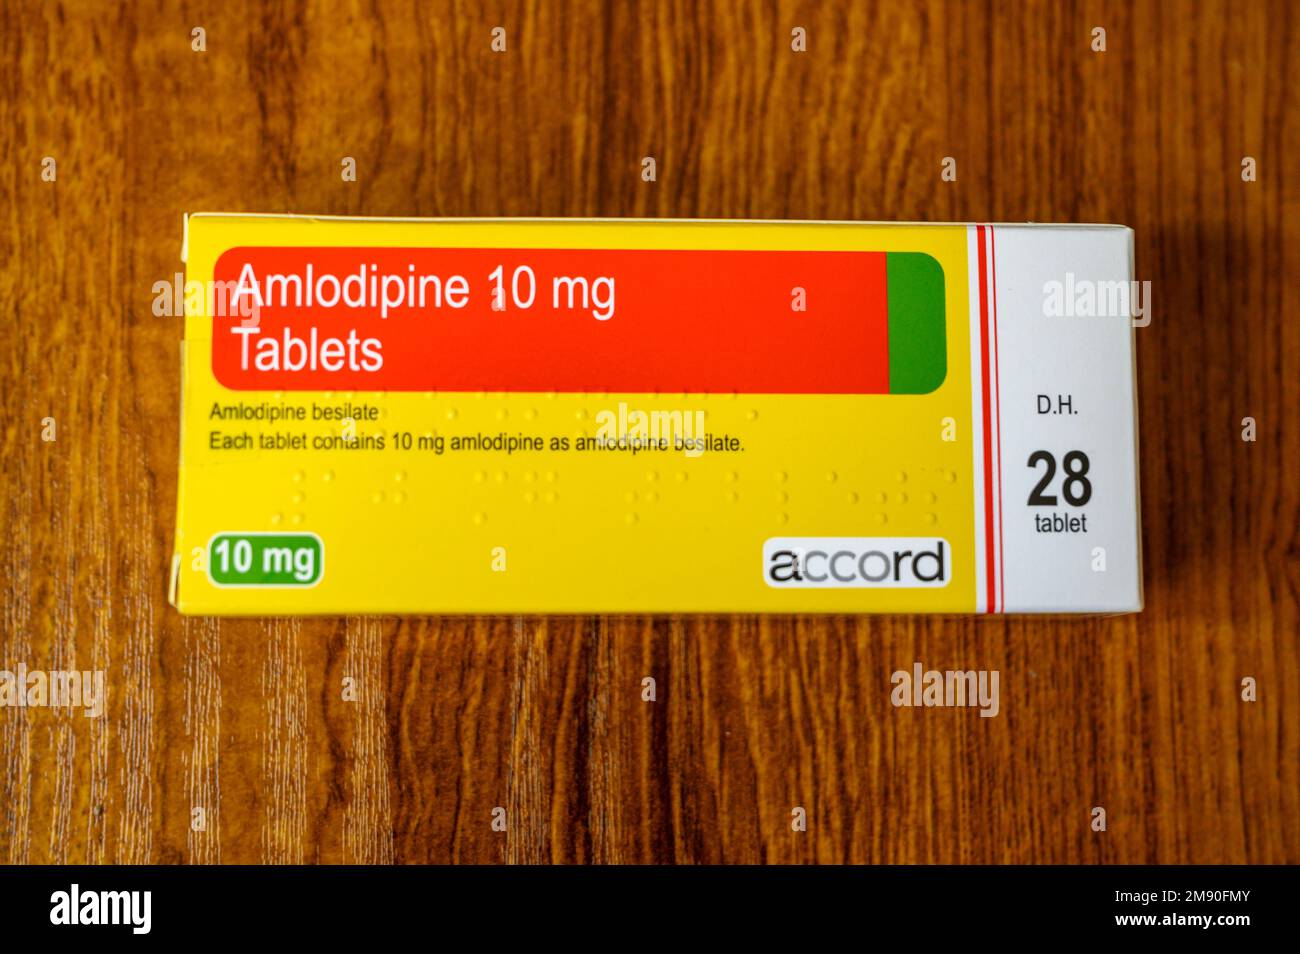 Amlodipine 10 mg tablets for the treatment of high blood pressure, hypertension Stock Photo